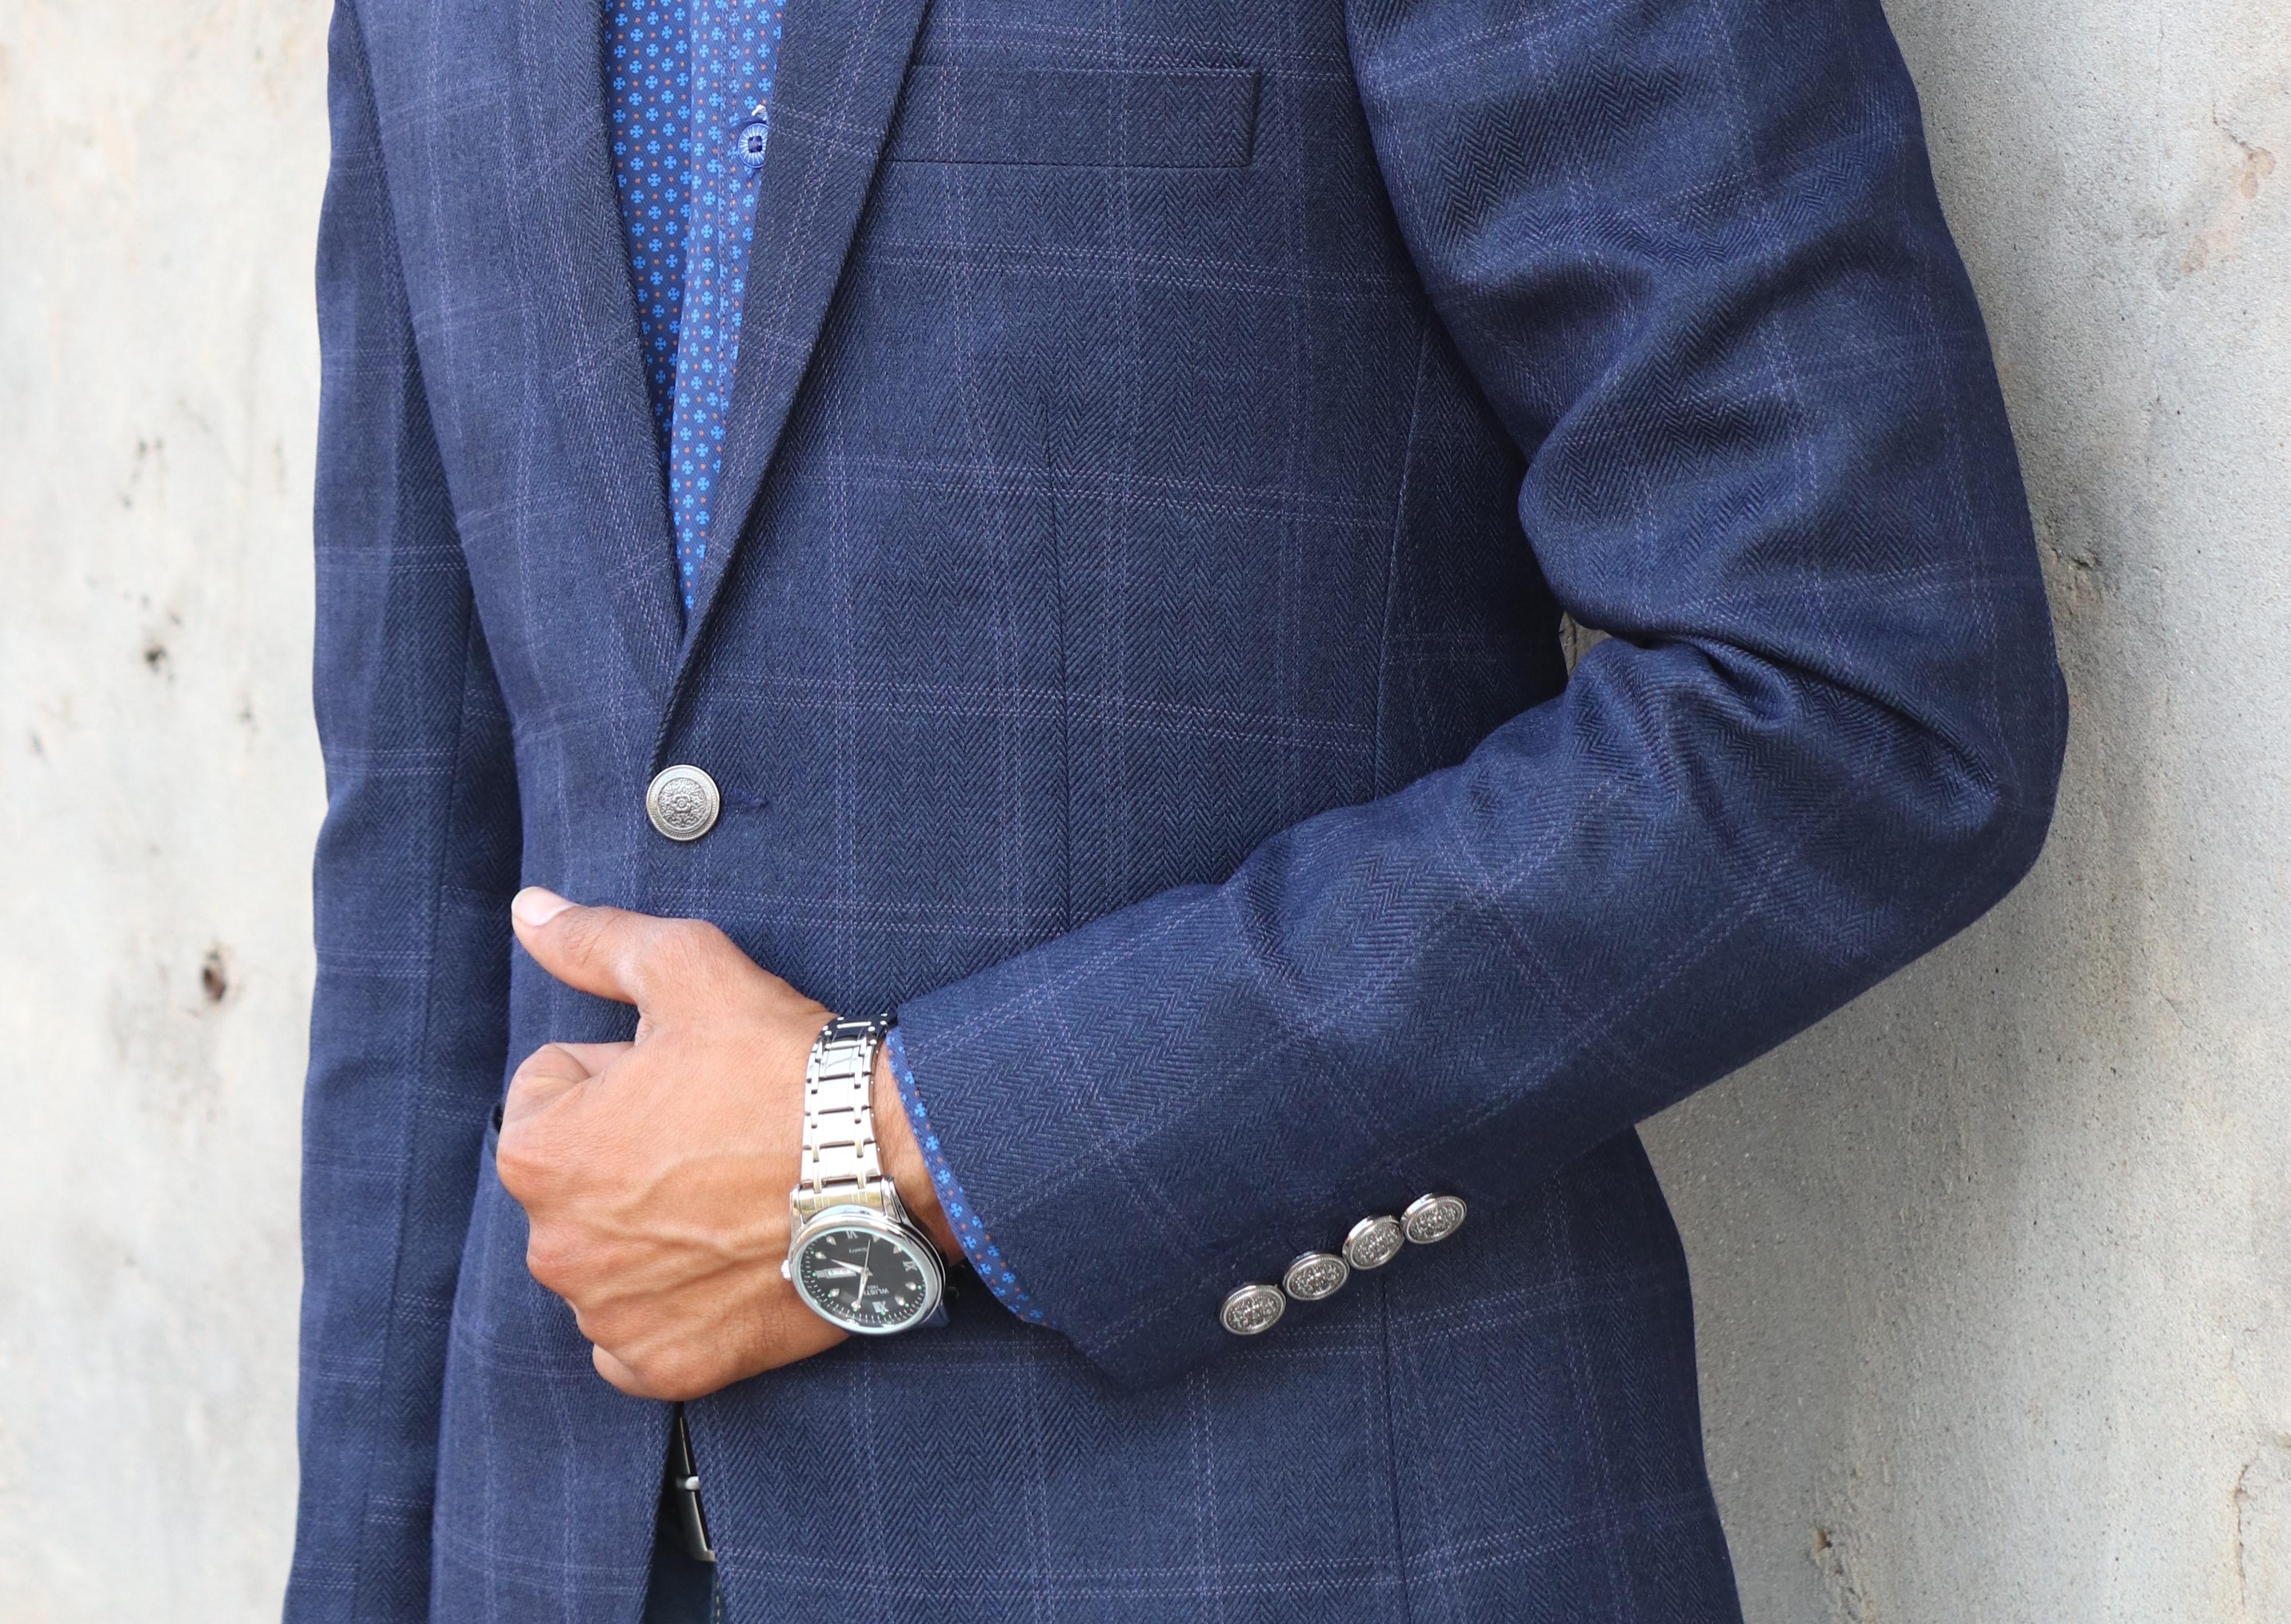 Suit vs Sports Jacket vs Blazer - What's The Difference? 